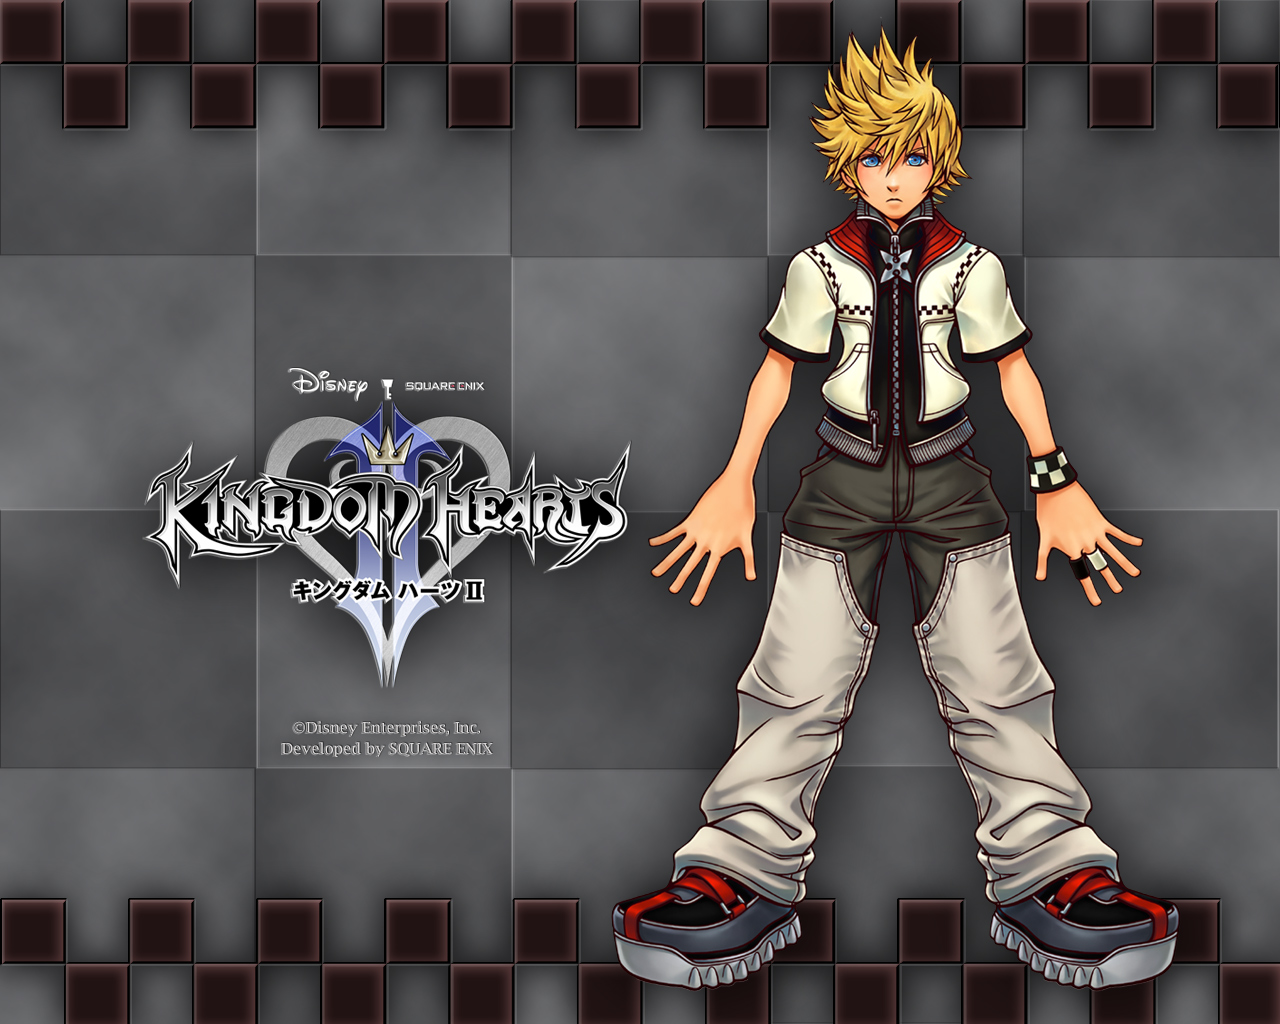 kingdom hearts 1.5 and 2.5 download free